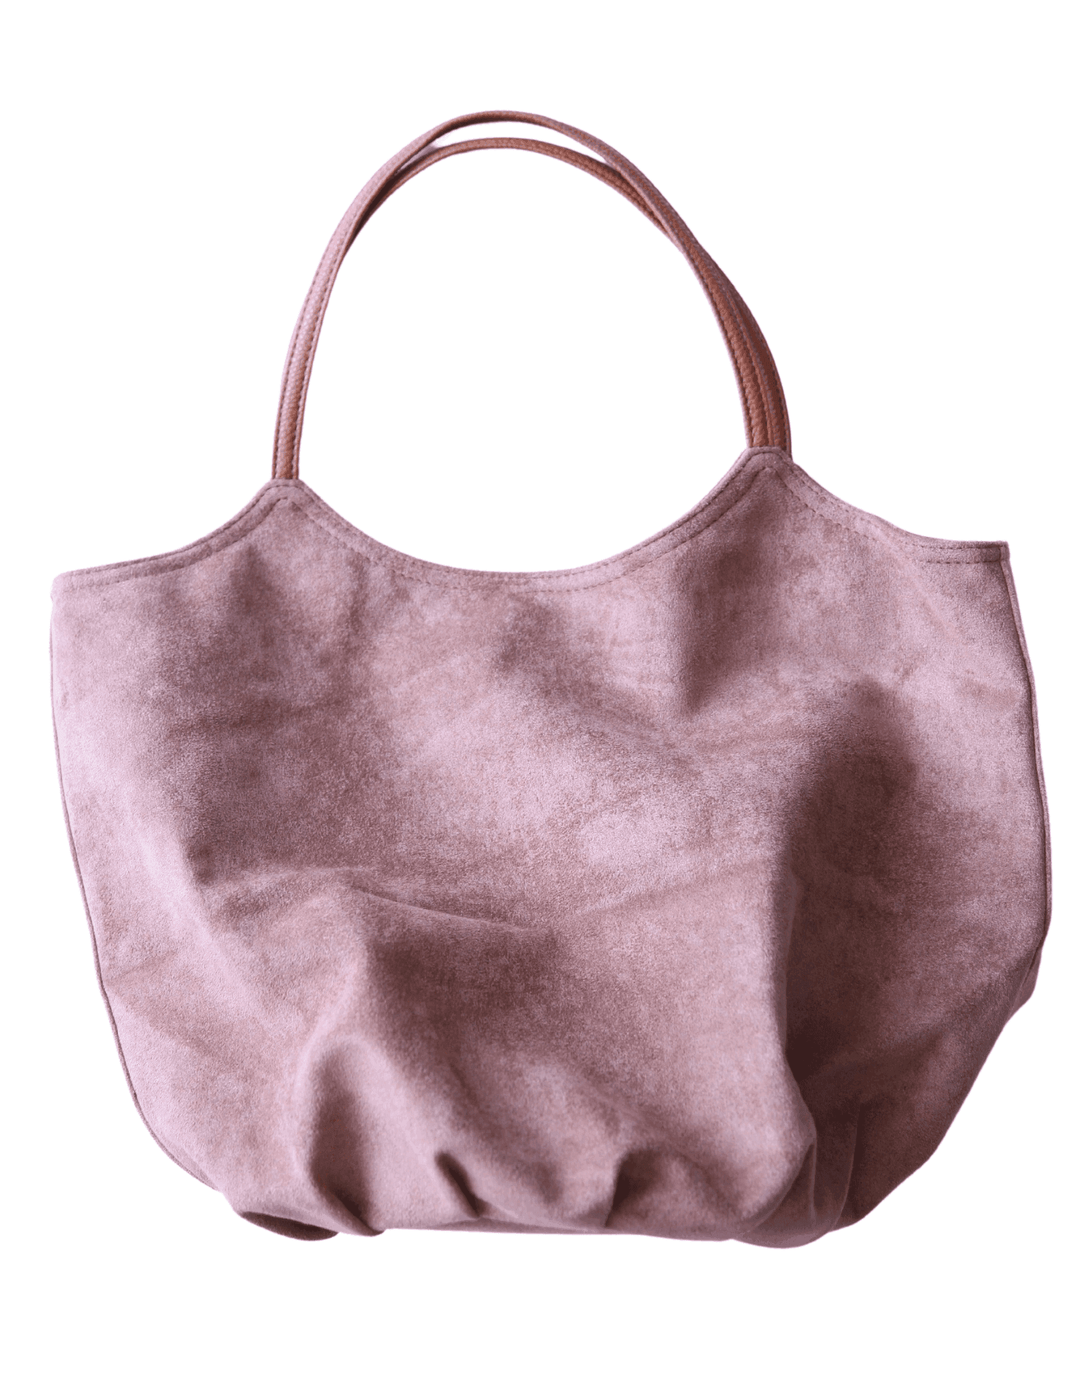 Faux suede tote bag brown- tres chic